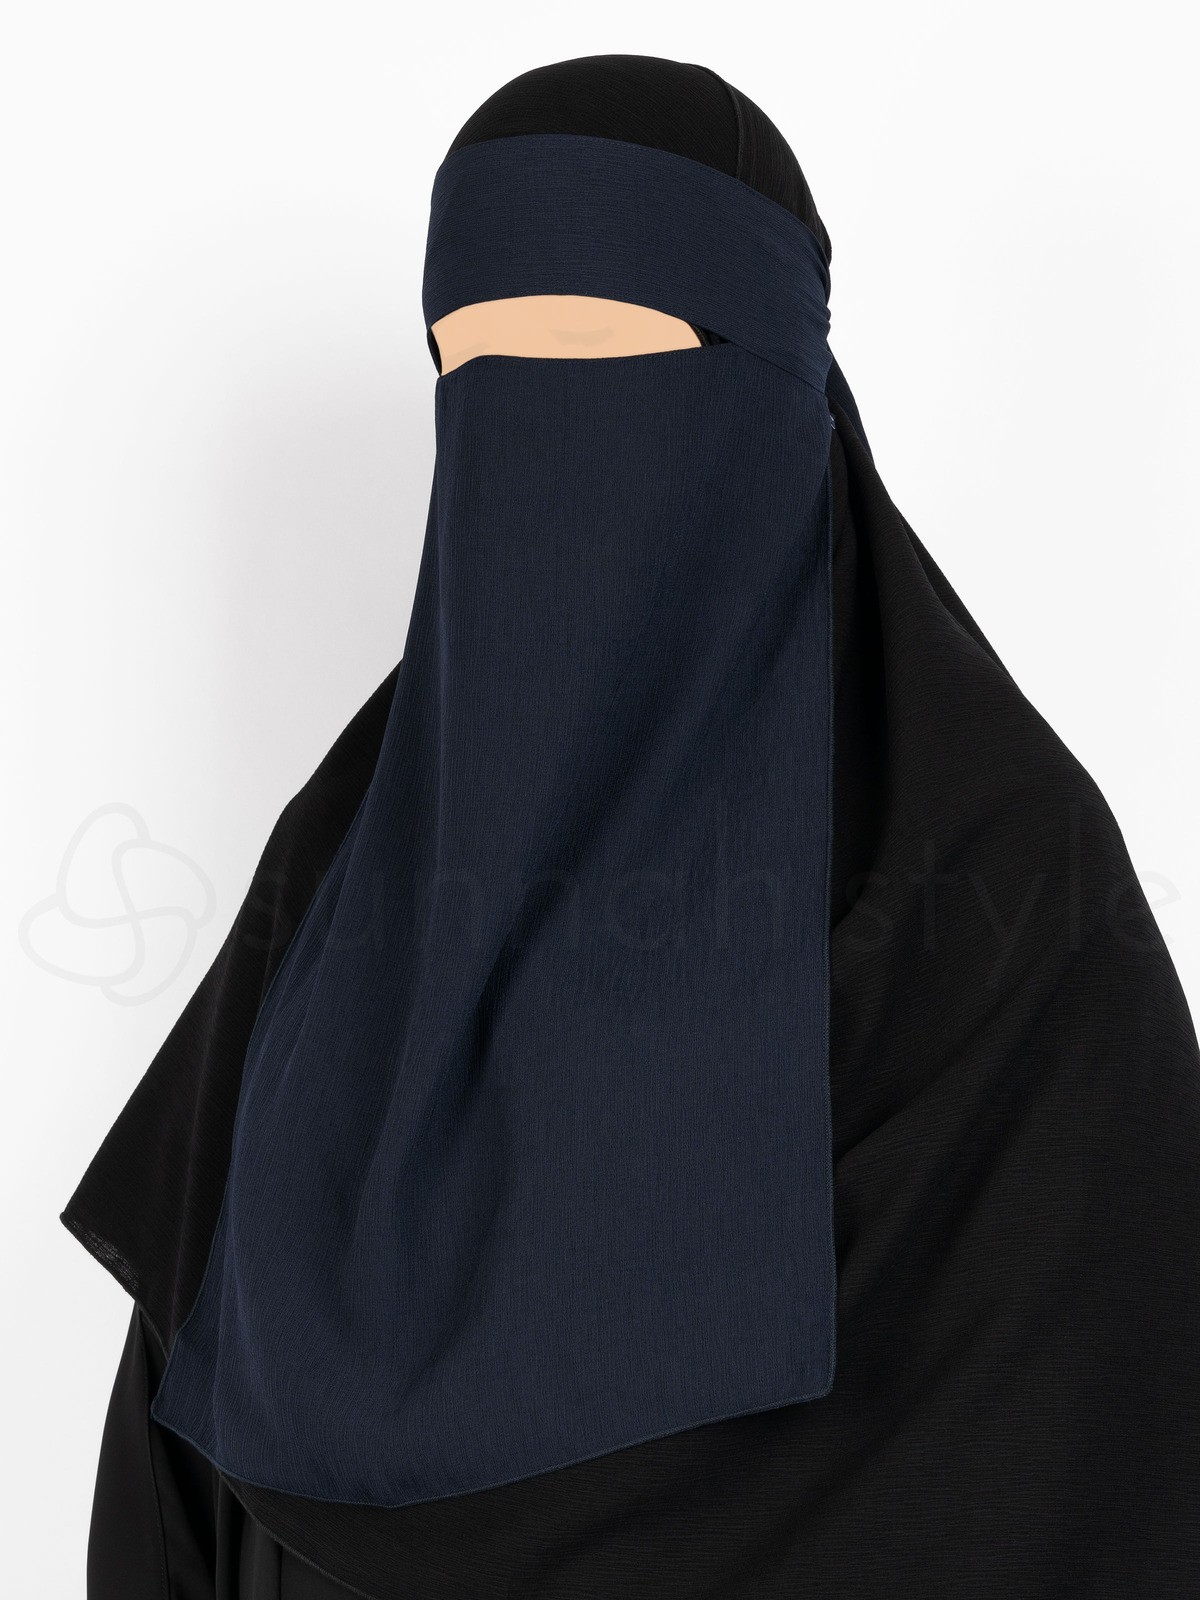 Sunnah Style - Brushed One Layer Niqab (Mesa Rose)